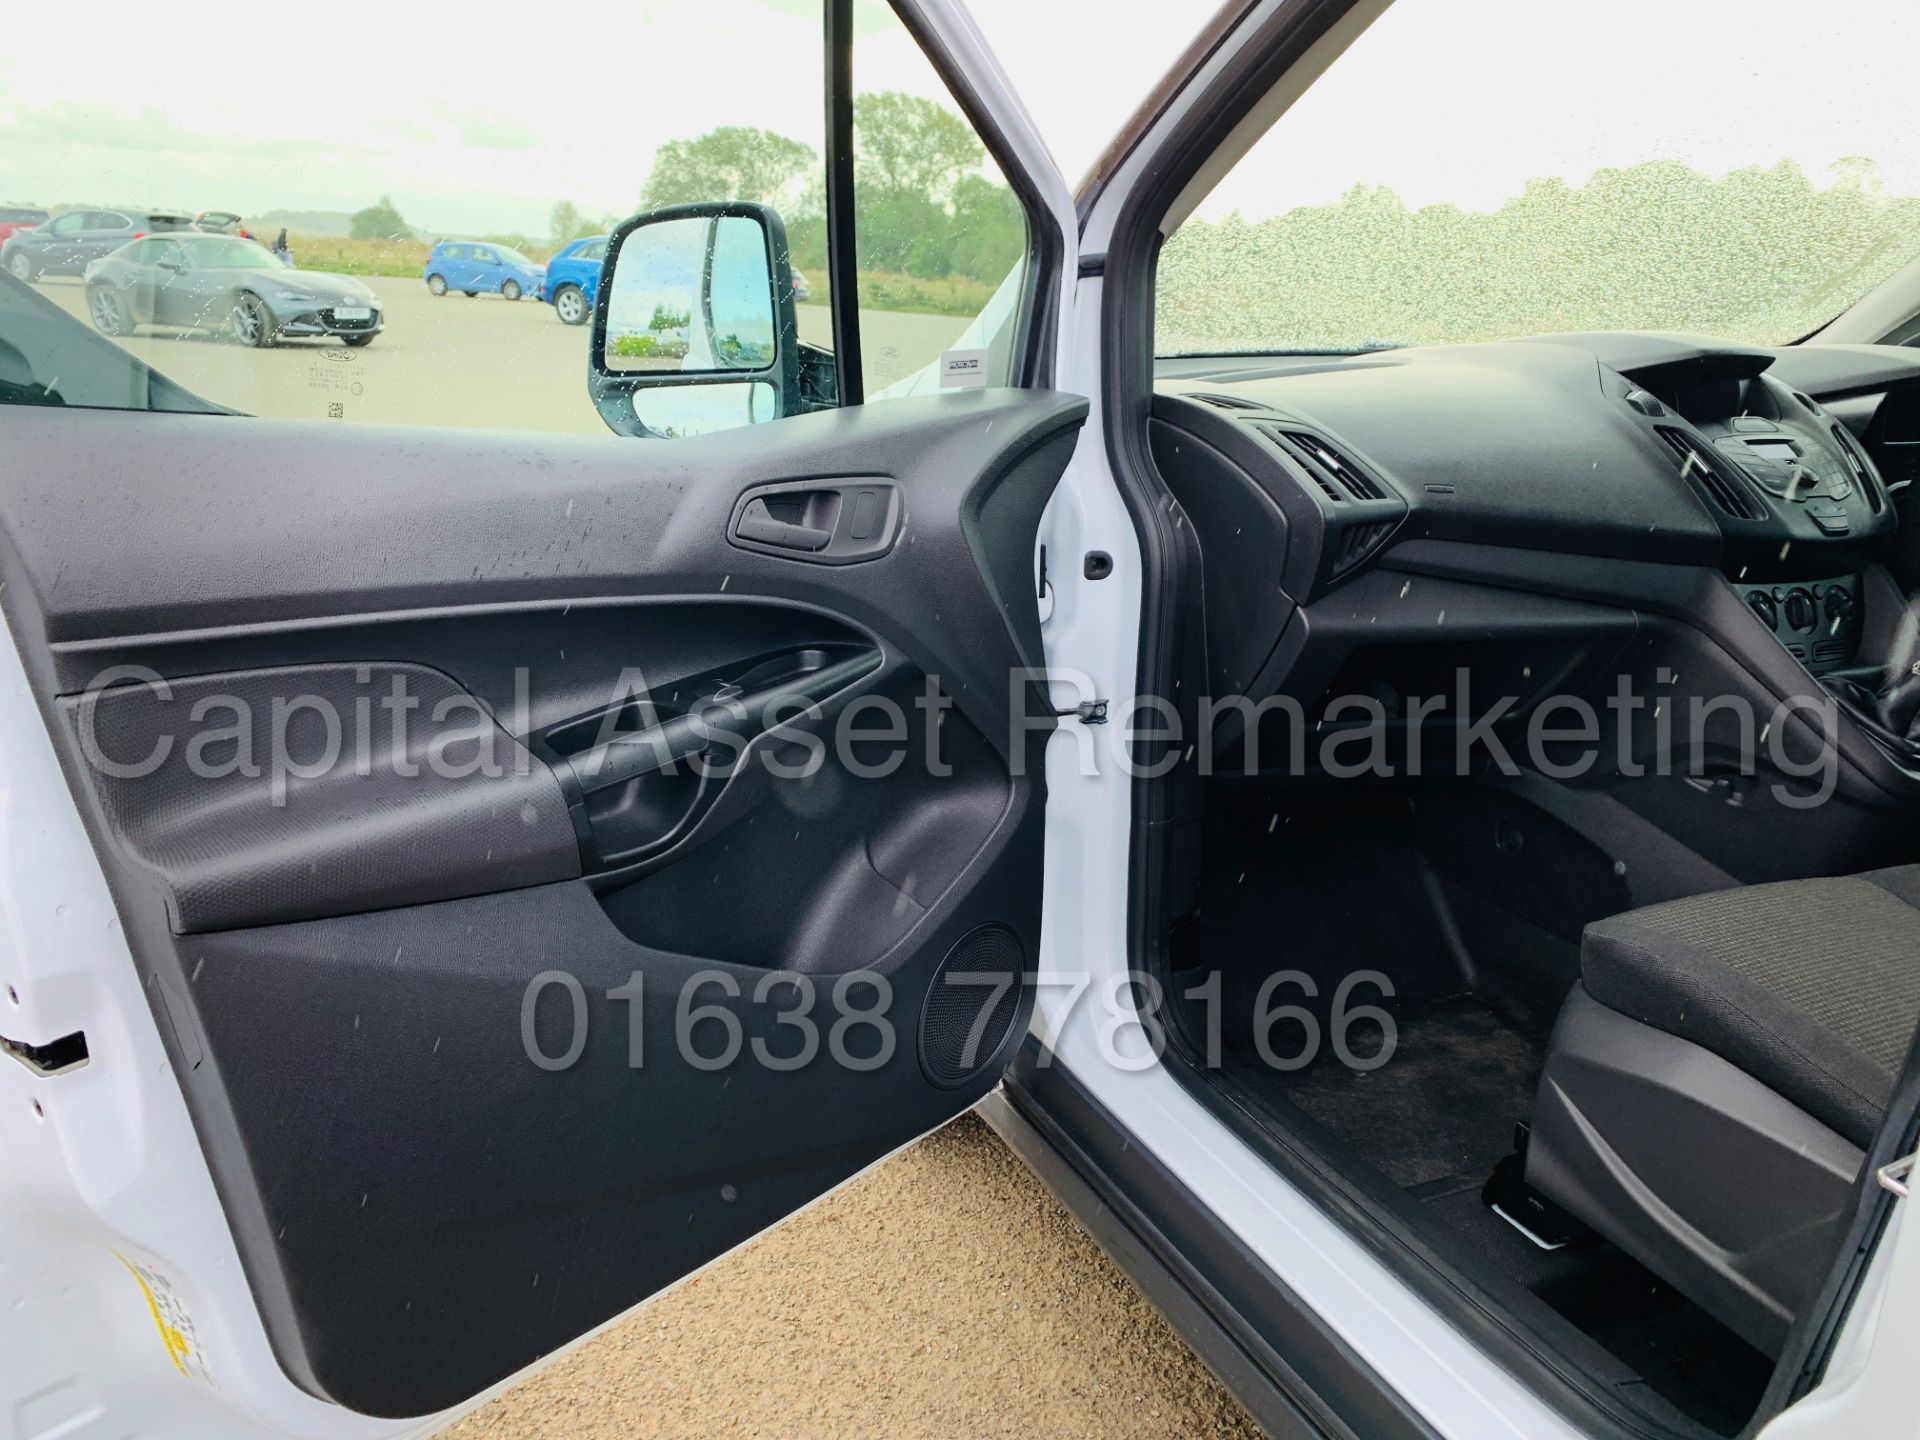 Ford Transit CONNECT 75 T200 *SWB - PANEL VAN* (2018 MODEL) '1.5 TDCI - EURO 6 COMPLIANT' (1 OWNER) - Image 15 of 36